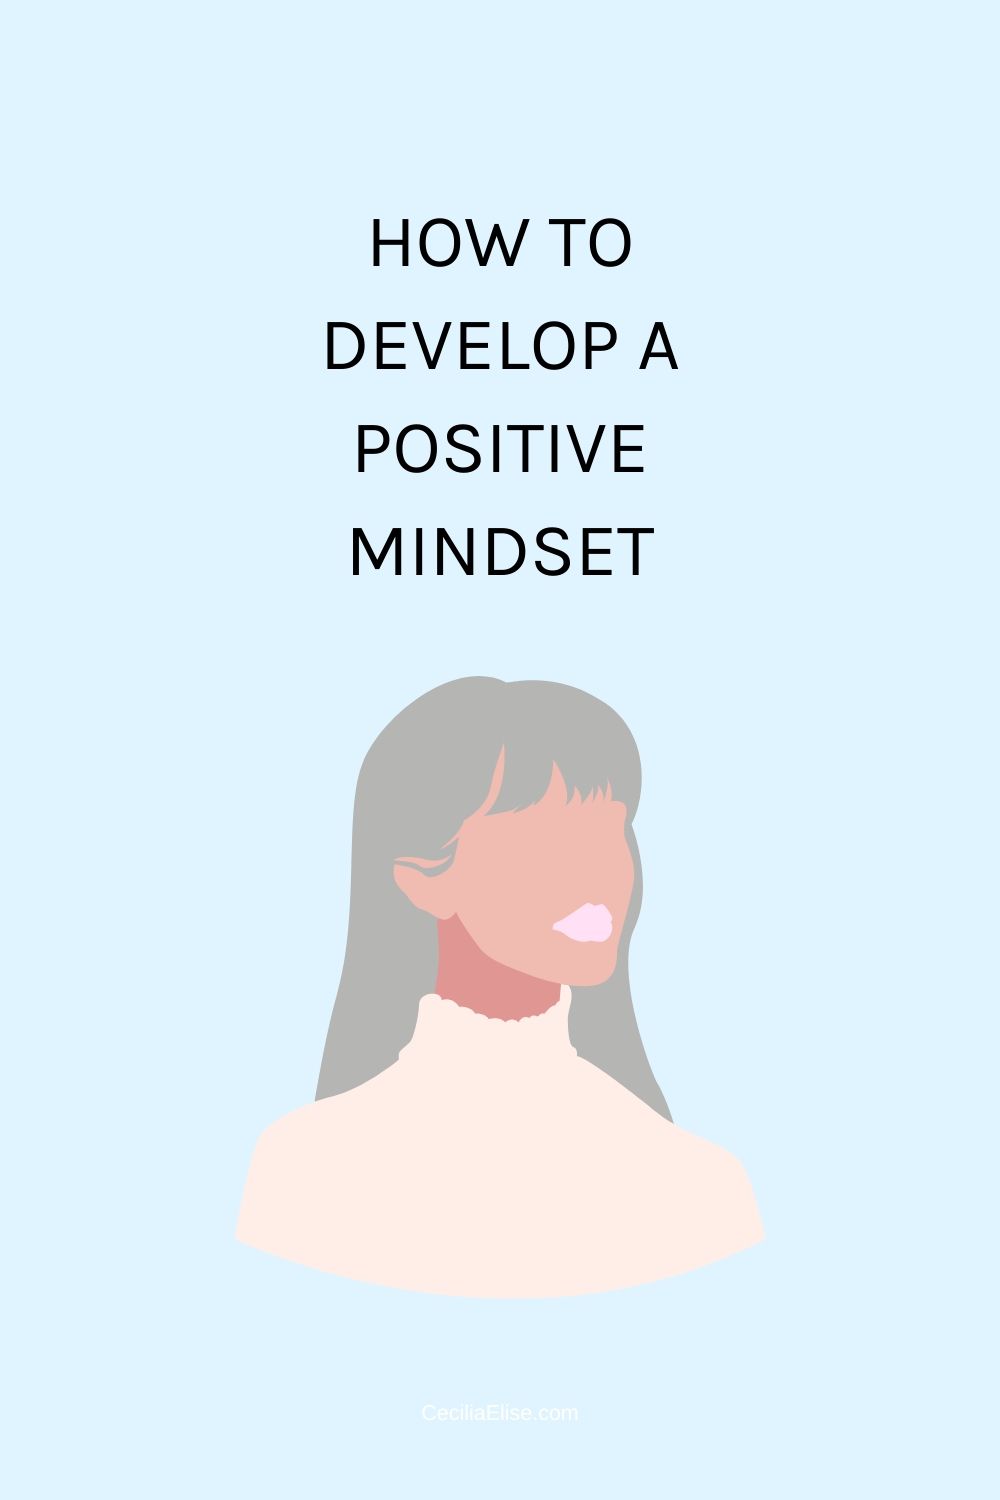 How to develop a positive mindset